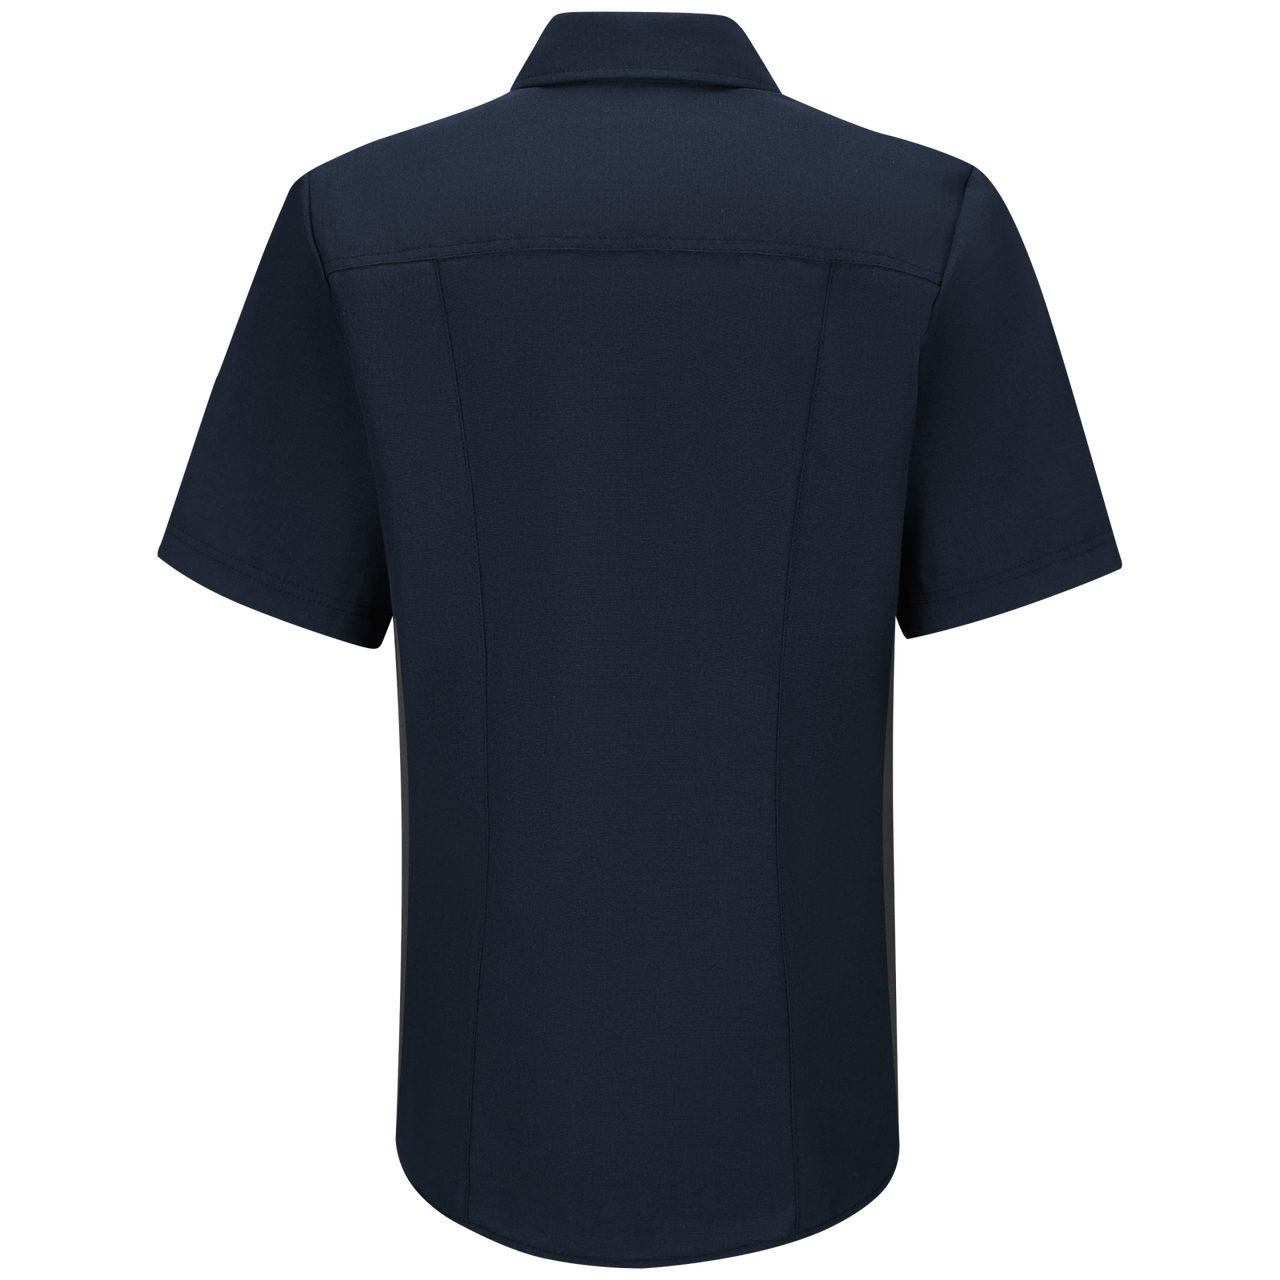 Workrite Women's Classic Fire Officer Shirt (FSE3) |  The Fire Center | Fuego Fire Center | Store | FIREFIGHTER GEAR | FREE SHIPPING | Made with durable, flame-resistant Nomex® IIIA fabric and autoclaved with our proprietary PerfectPress® process to give you a professional appearance that lasts. Featuring details like lined, banded collars and reinforced stitching, designed to support your needs.